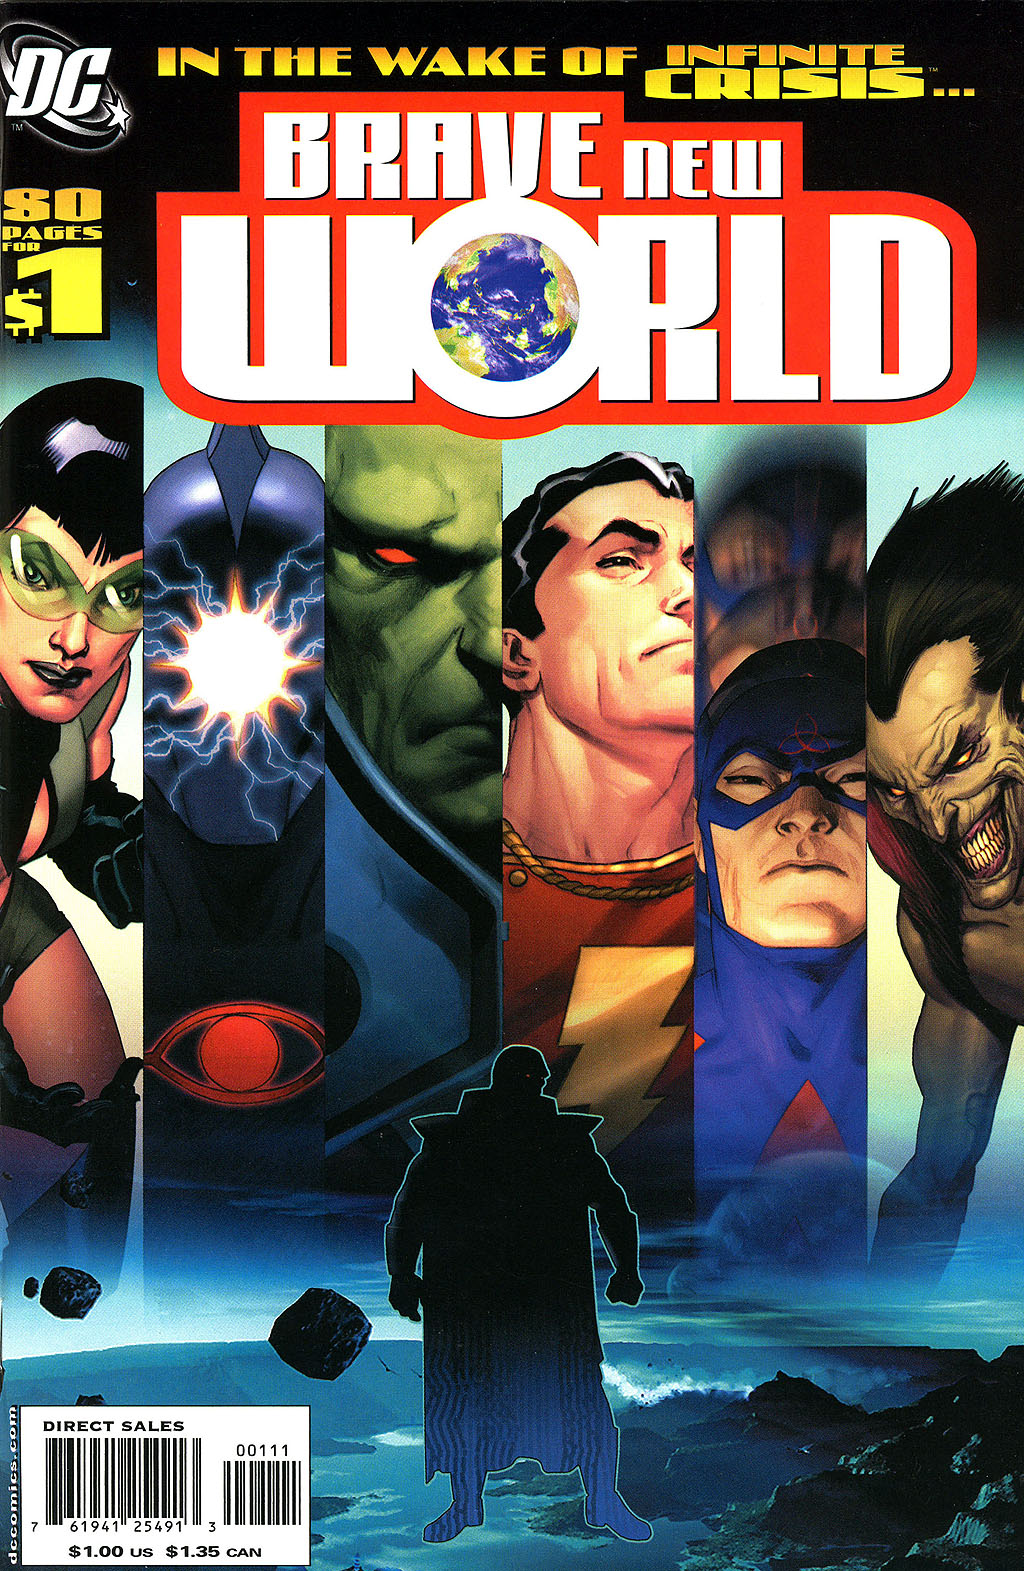 Dcu Brave New World | Read Dcu Brave New World comic online in high  quality. Read Full Comic online for free - Read comics online in high  quality .|viewcomiconline.com